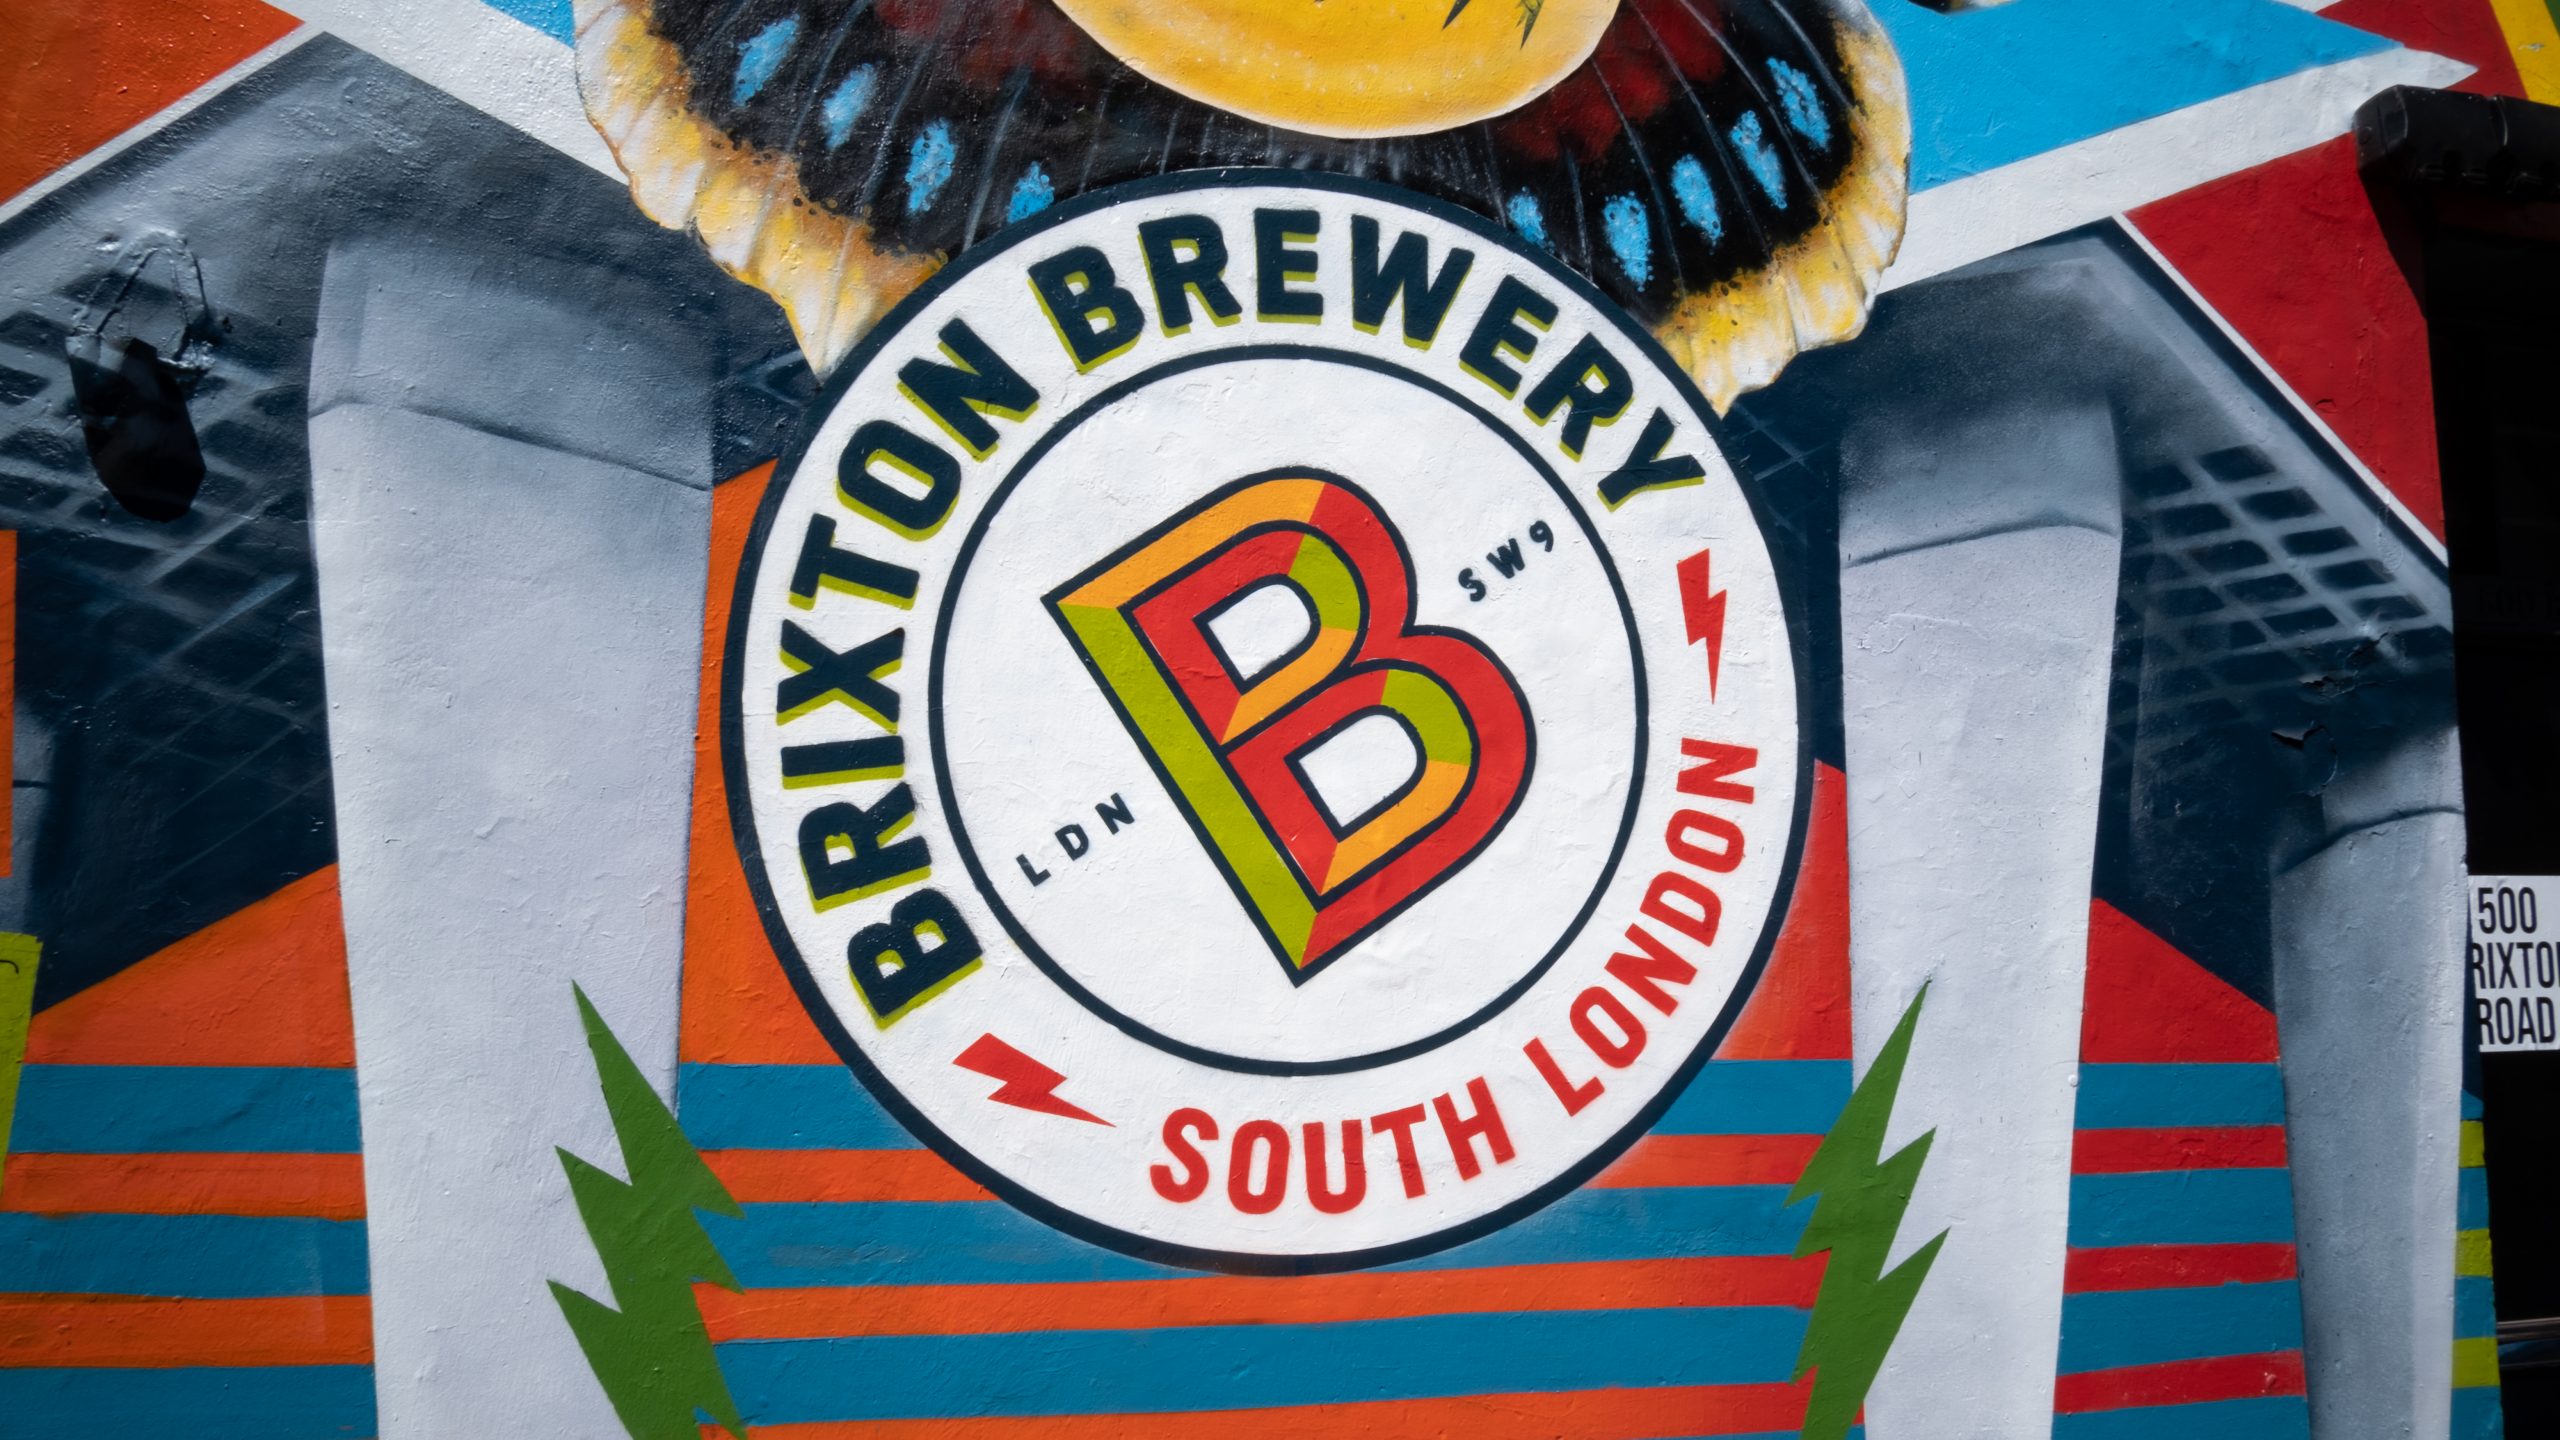 Brixton Brewery launches first major ATL campaign